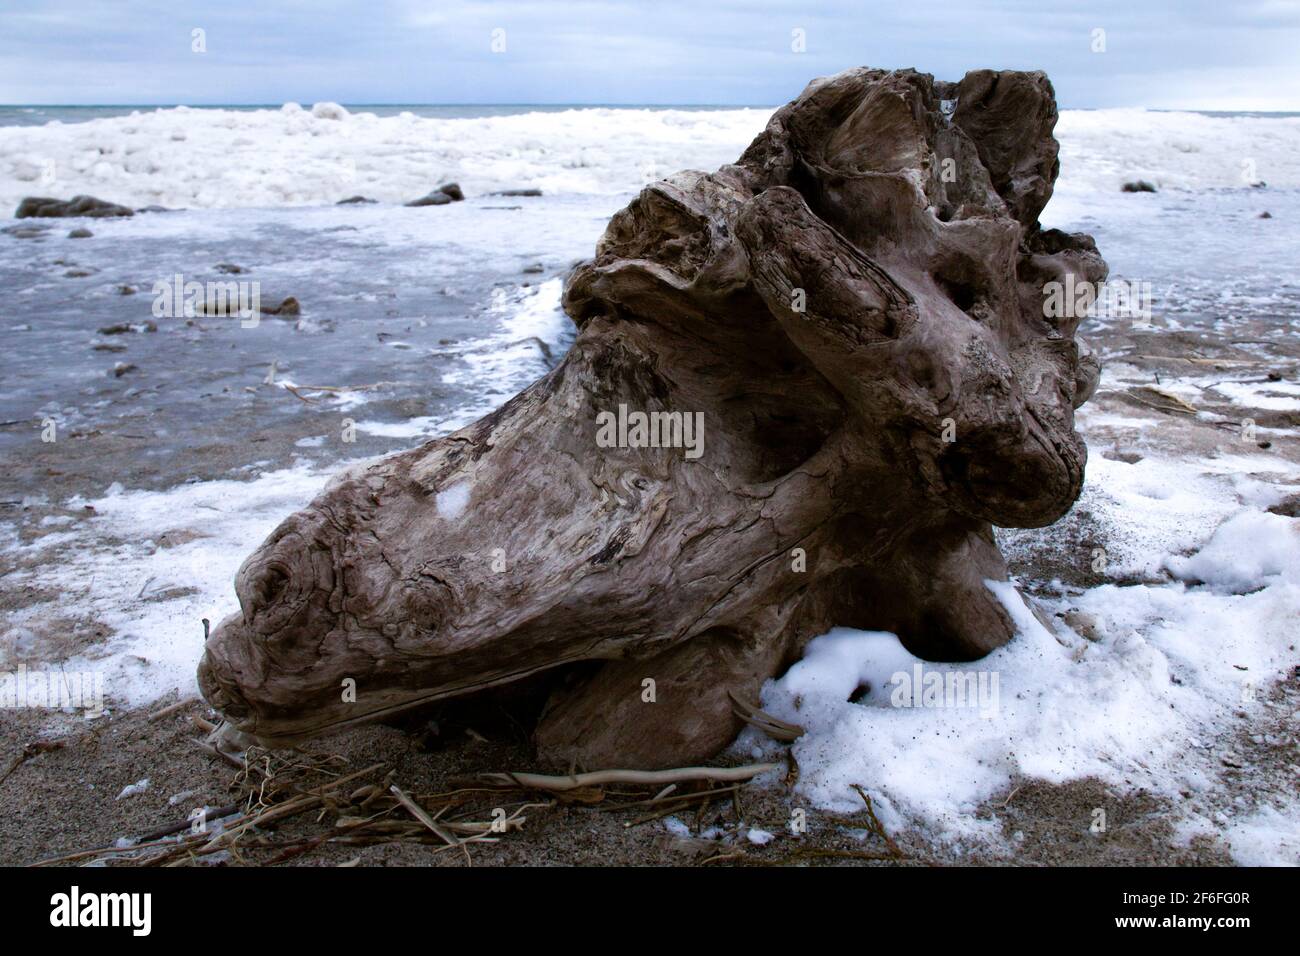 Winter in Southwestern Ontario, Canada — Large piece of driftwood on the icy shores of Grand Bend Beach, Lake Huron, shot in January. Stock Photo